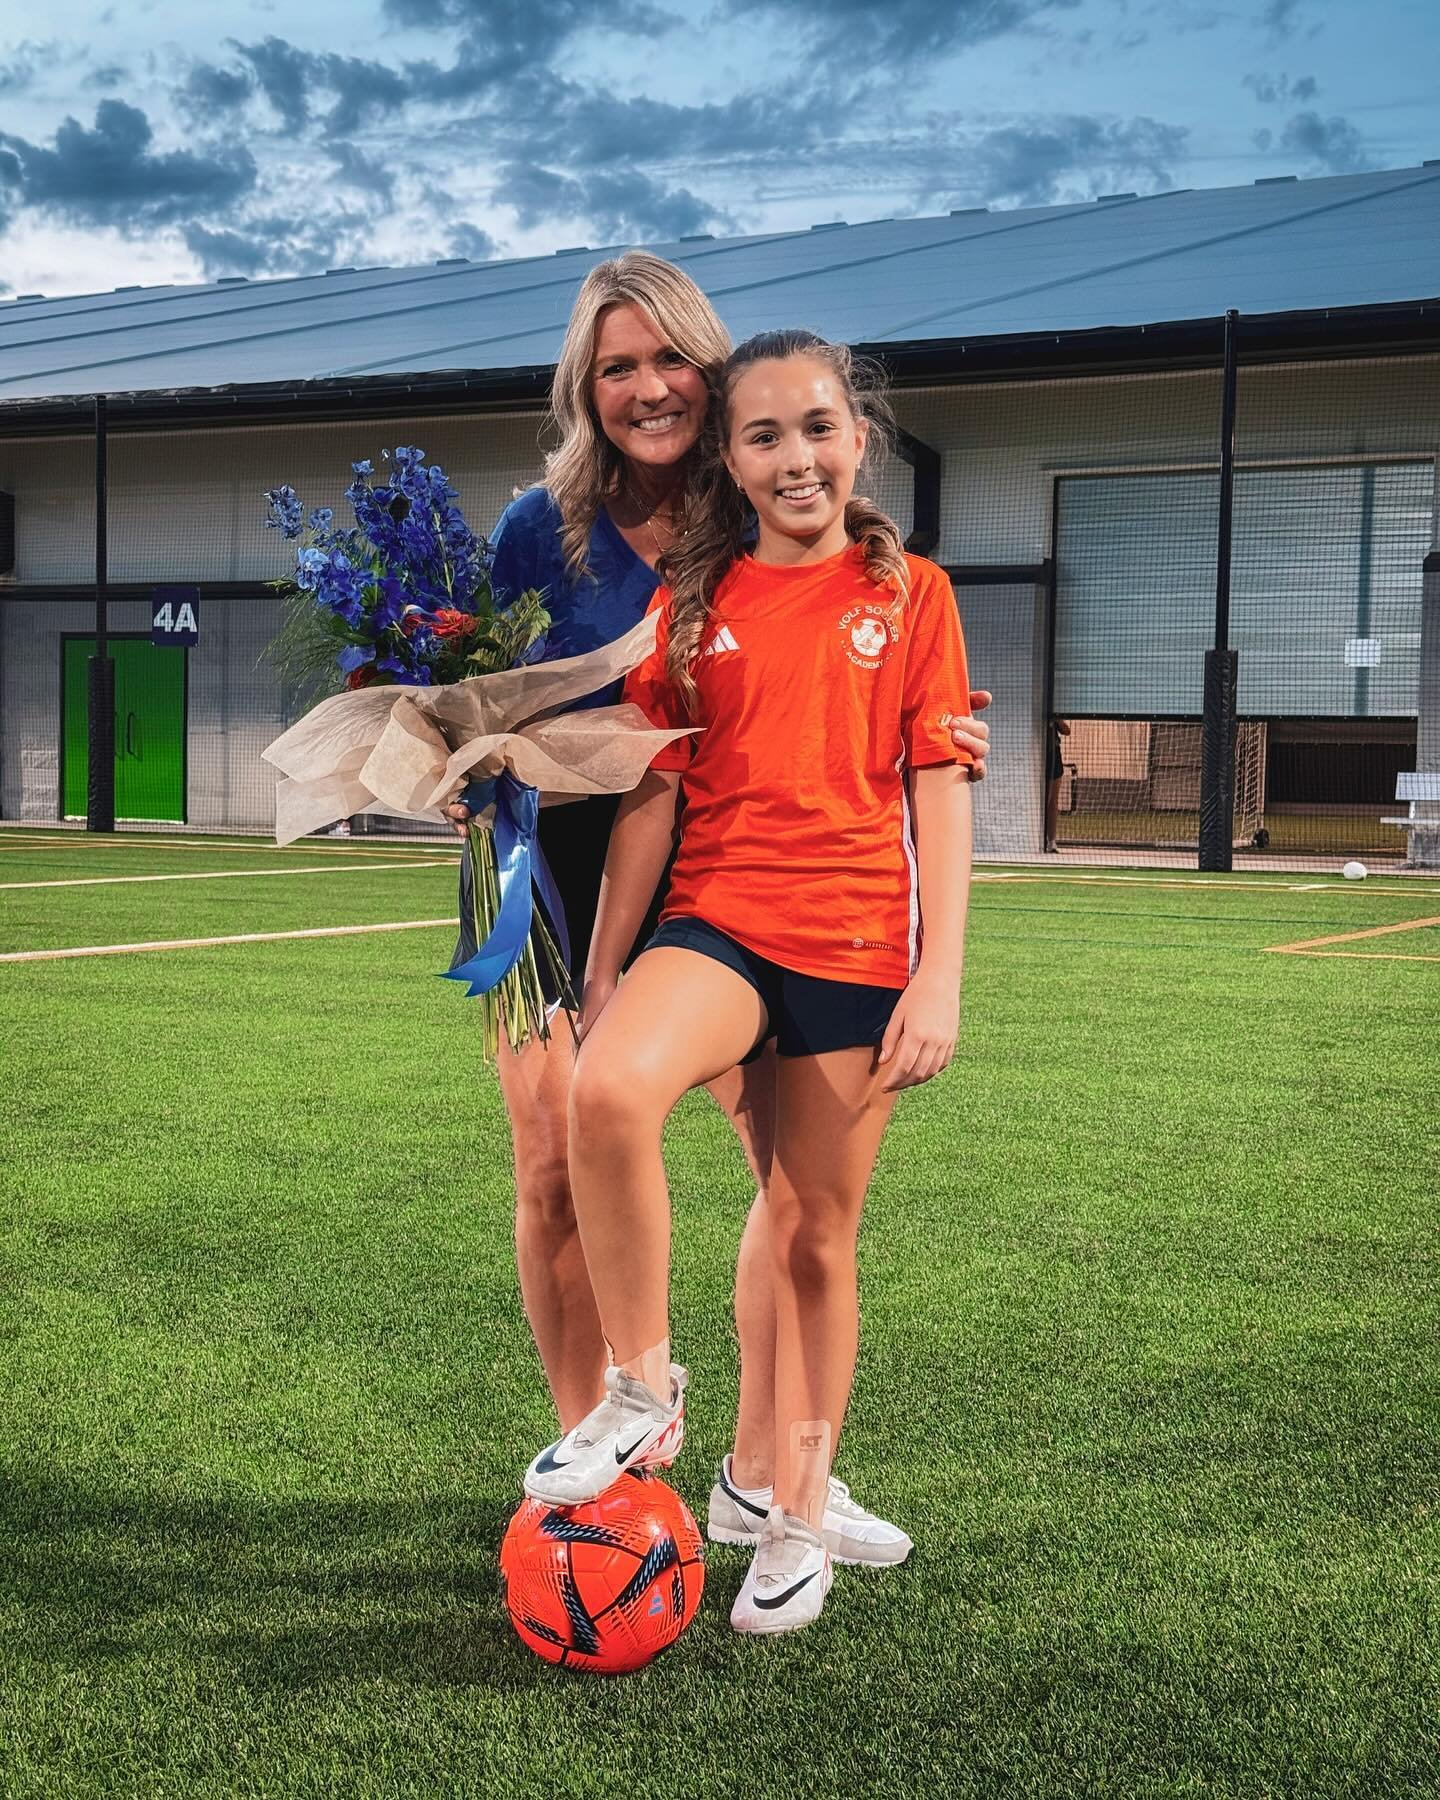 HAPPY MOTHER&rsquo;S DAY 💙🧡

To all the moms, we wish you the best 🫶🏽 Enjoy your special day 😁
#morevolf #moreskills
&bull;
&bull;
#vsa #volfsoccer #mothersday #mother #mom #love #family #soccerlife #soccerfamily #socceracademy